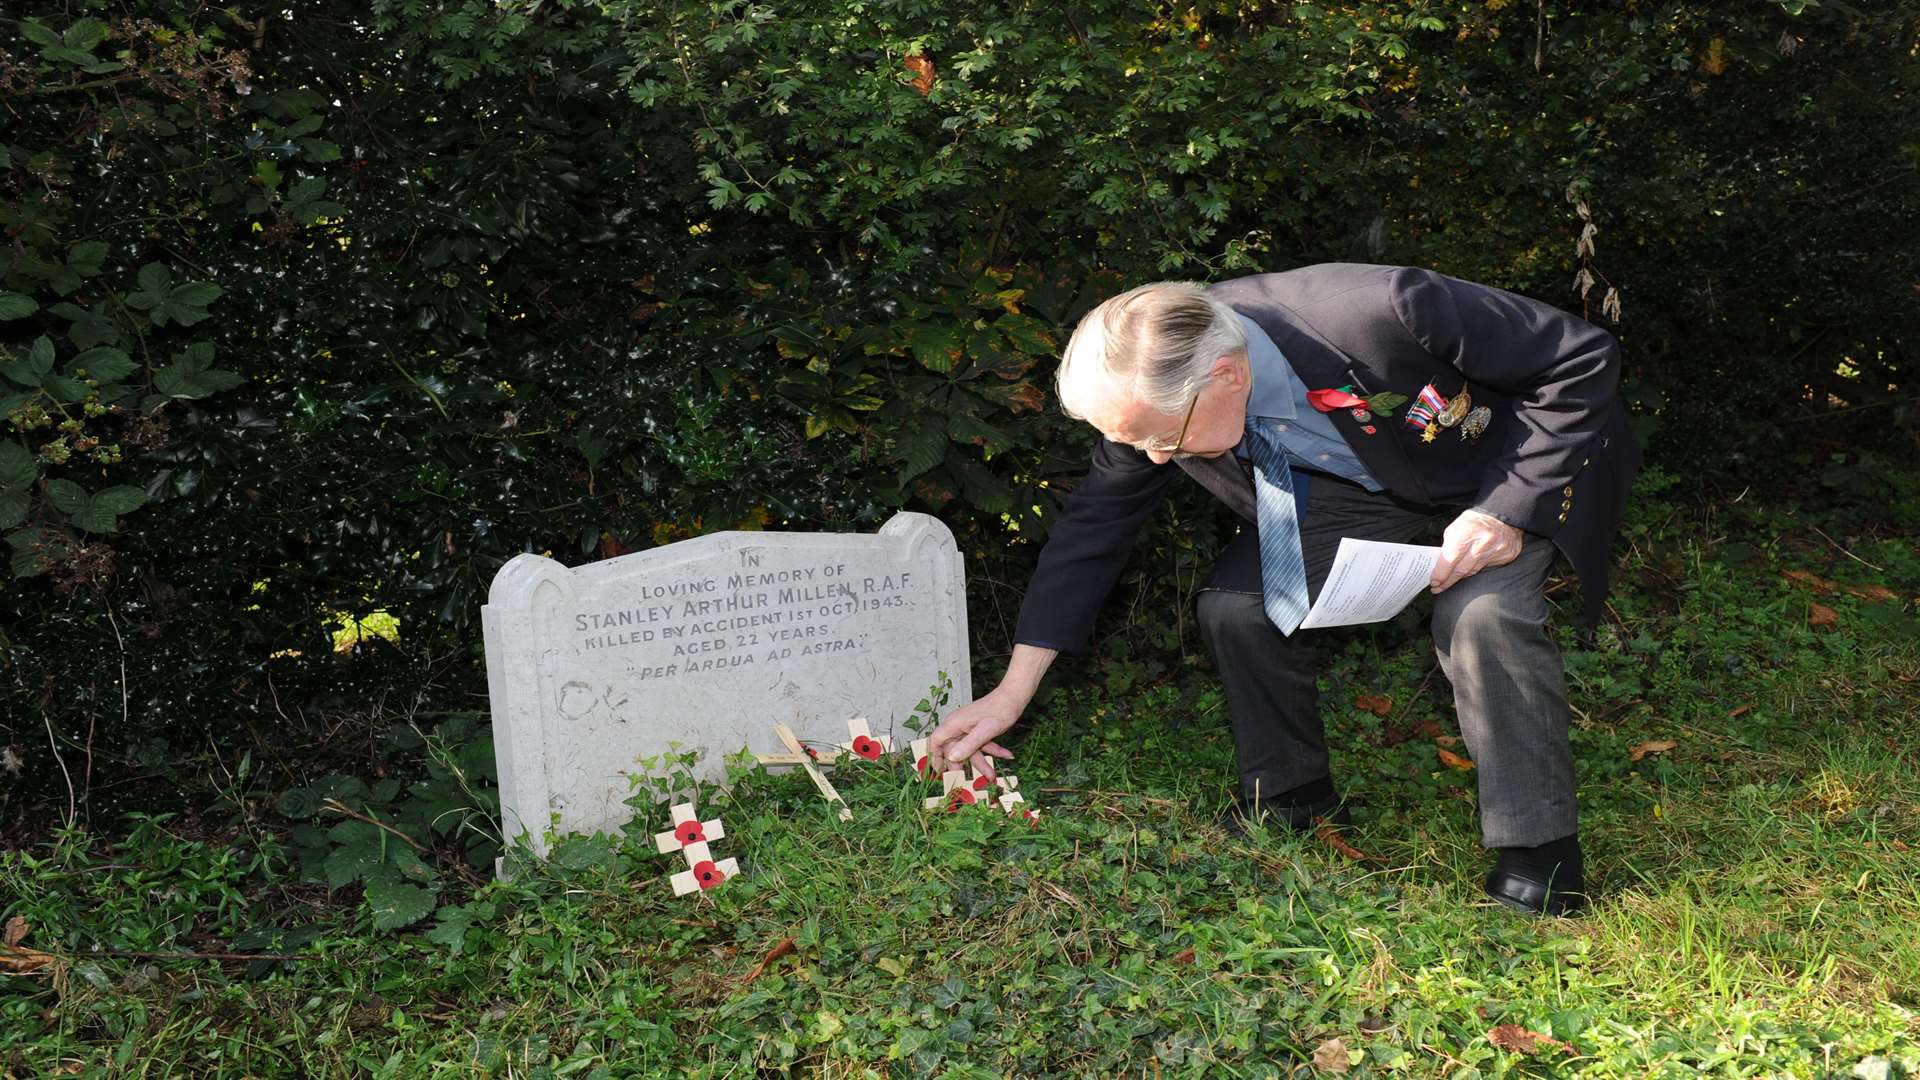 Bill Kingman at a special service at St Mary Magdalene Church, marking the Commonwealth graves of the people from Gravesham who died during the First and Second World Wars